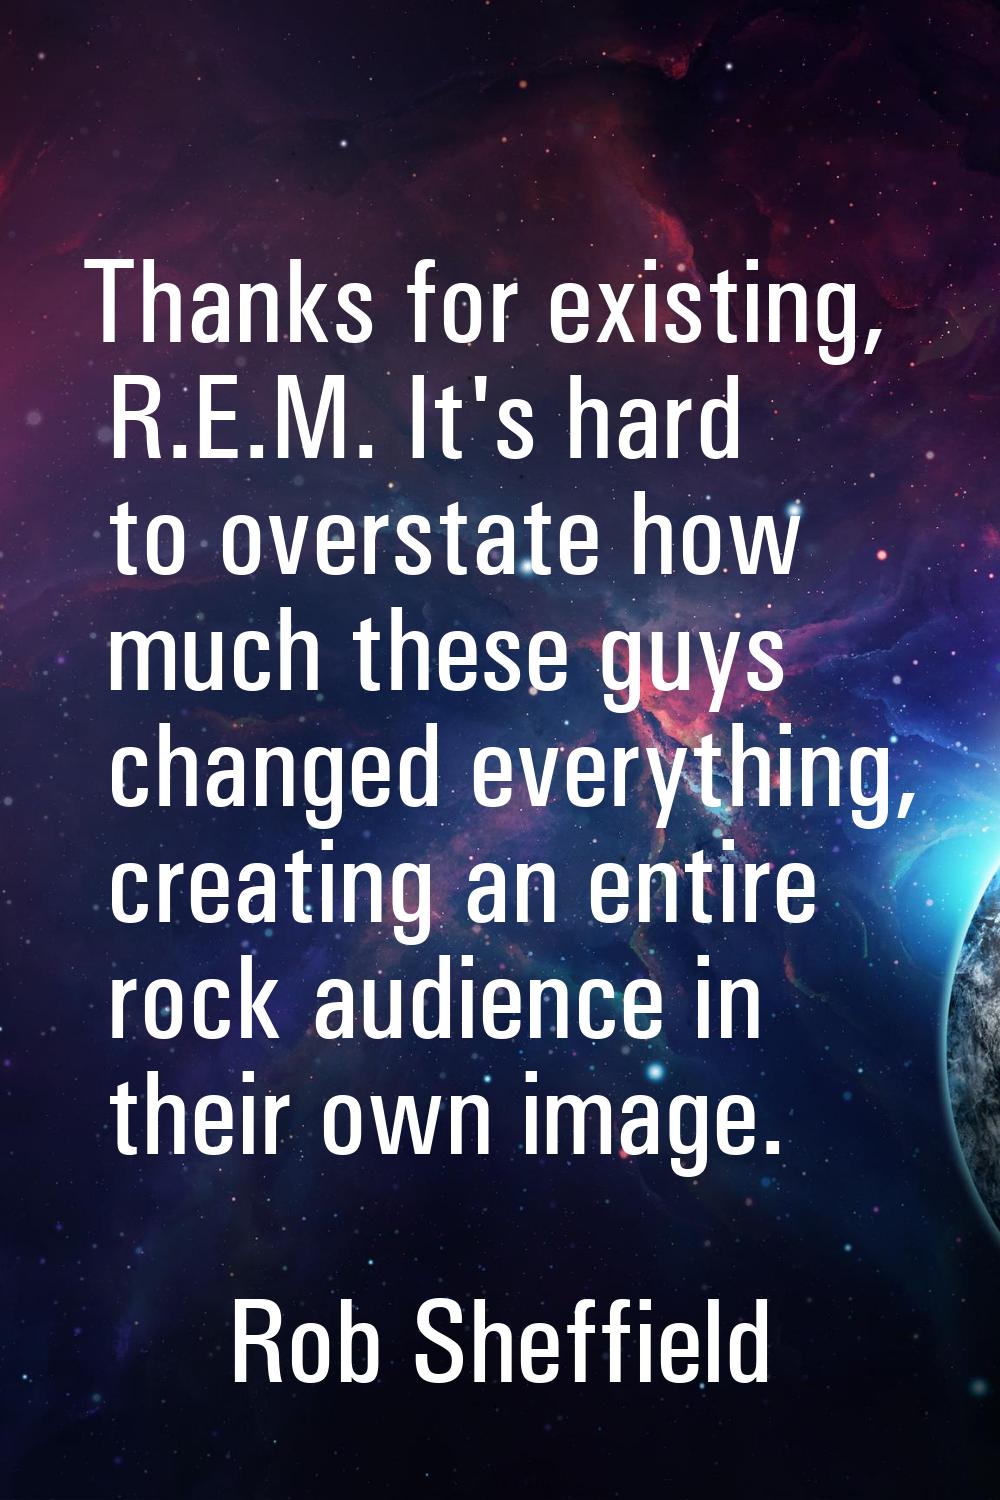 Thanks for existing, R.E.M. It's hard to overstate how much these guys changed everything, creating